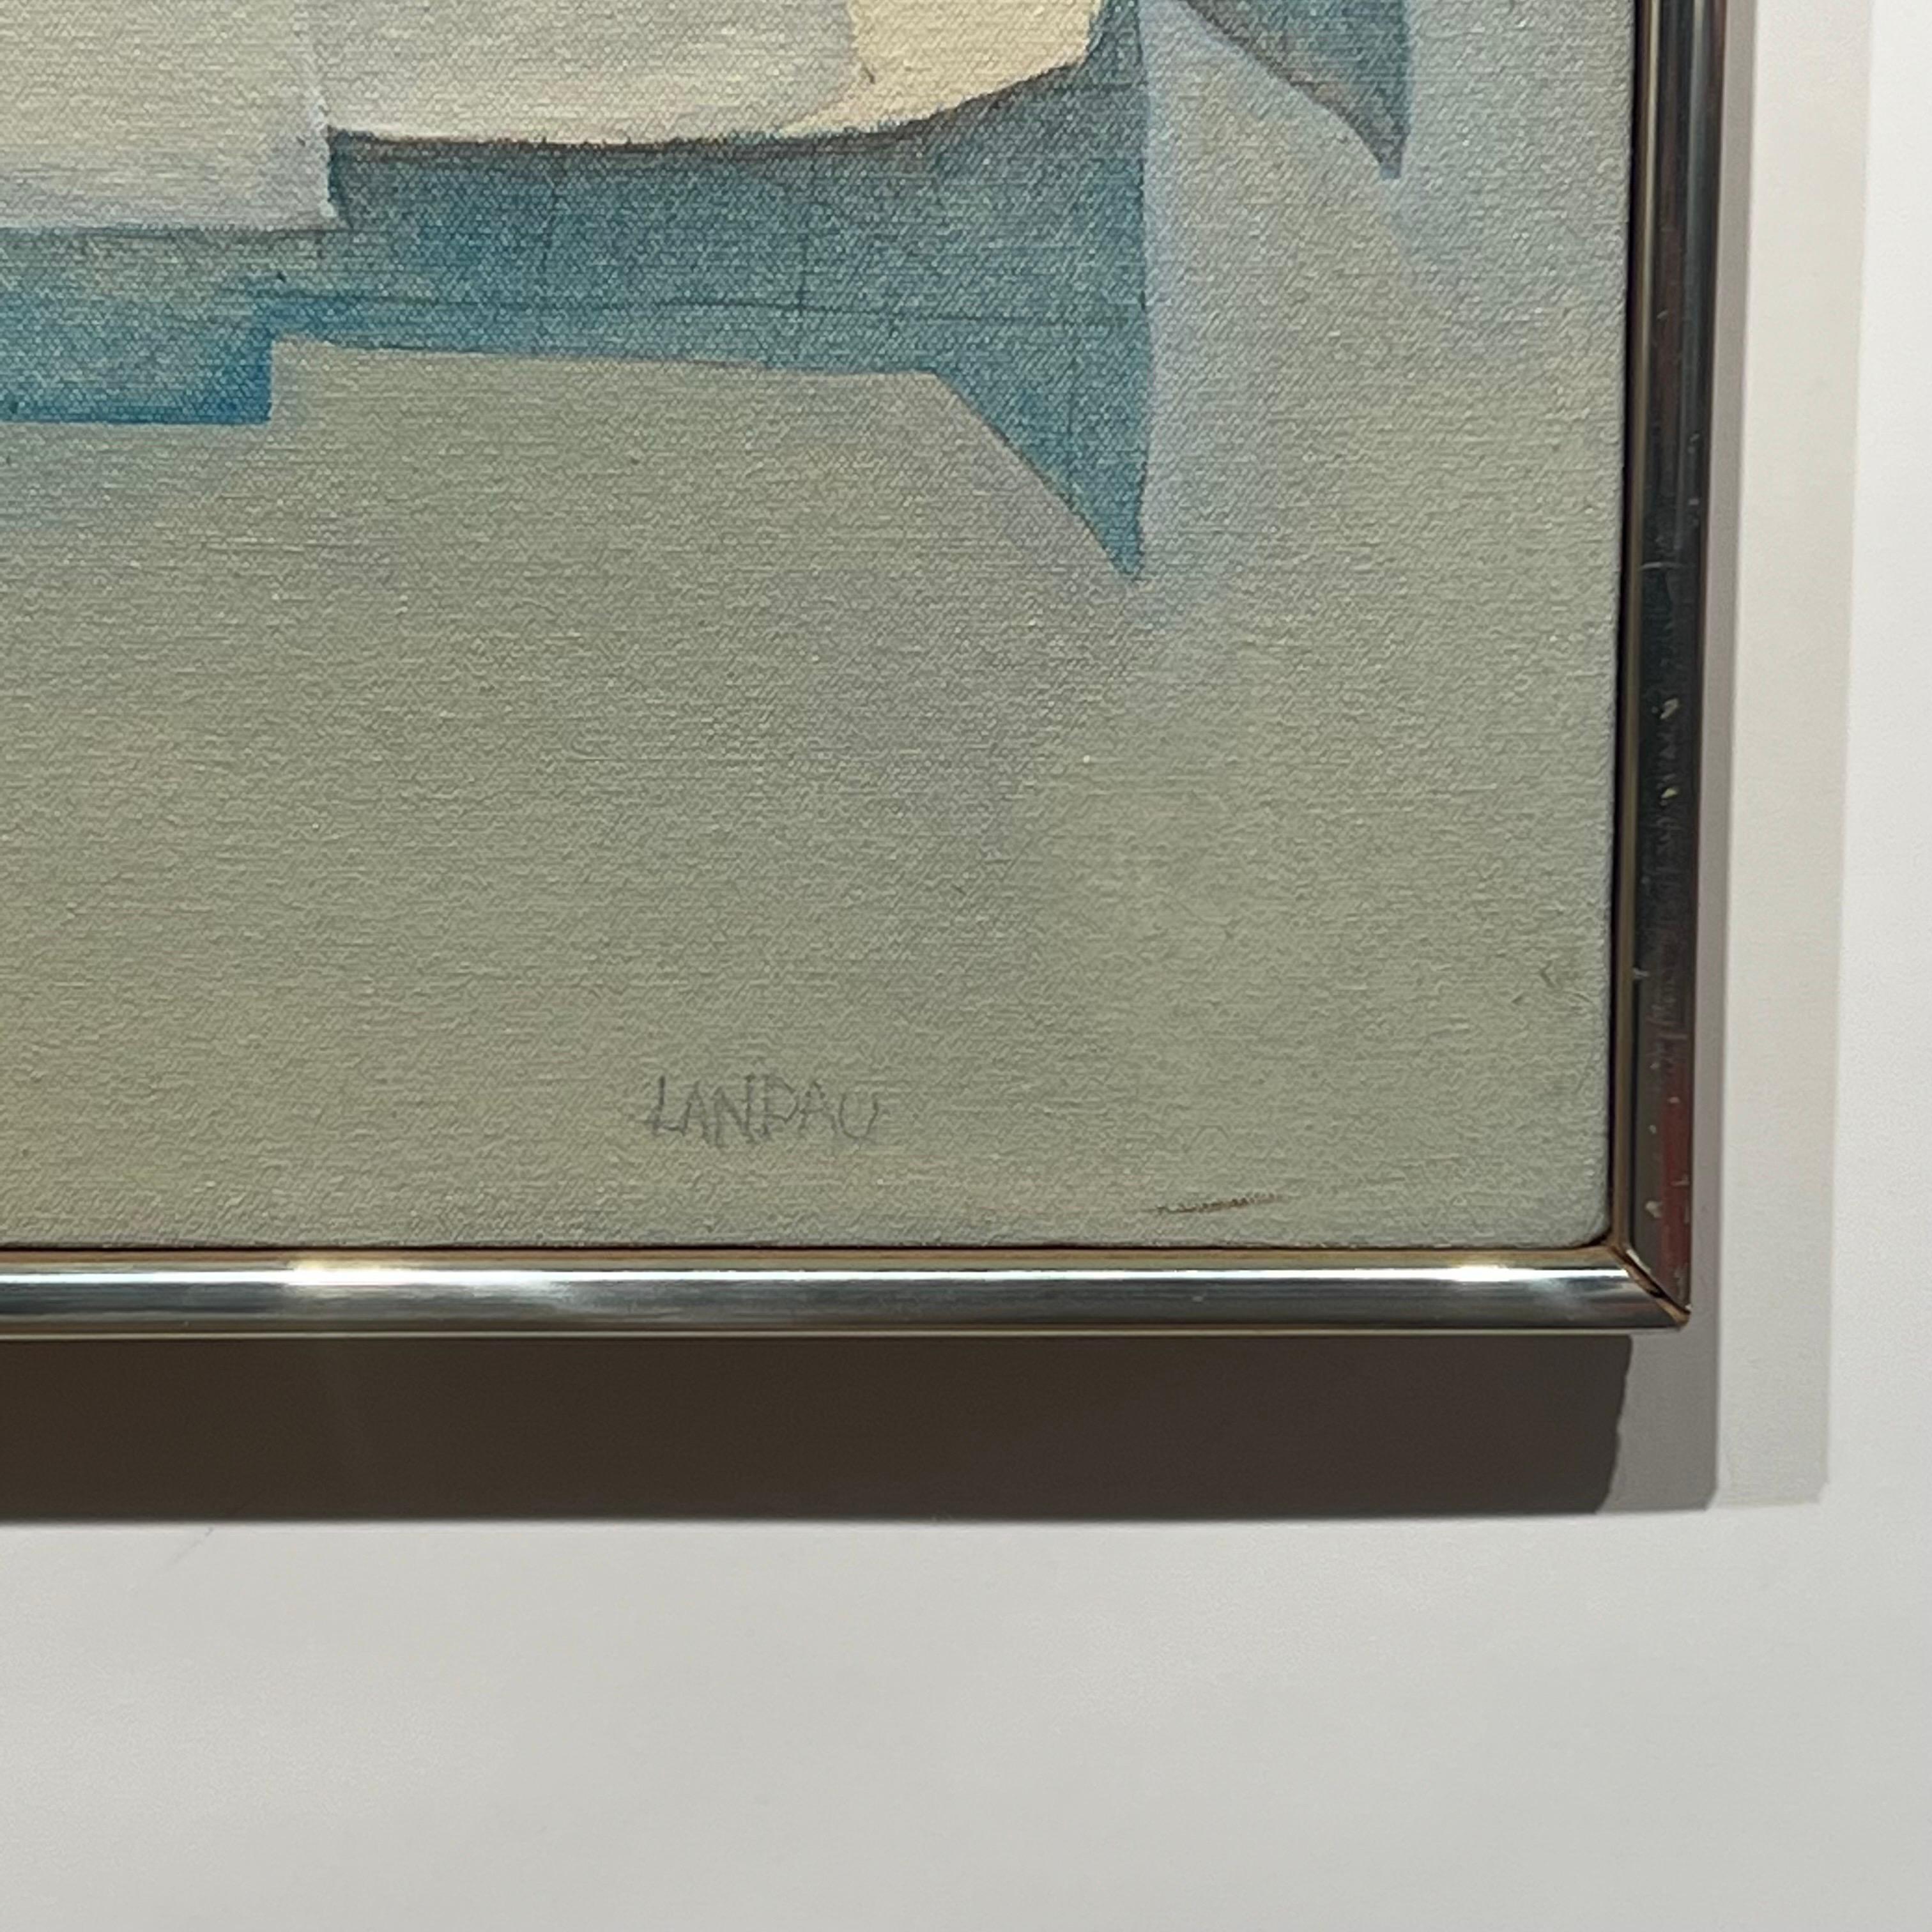 Laureen Landau “Torn Thiebaud” Abstract Oil on Canvas, 1970s In Good Condition For Sale In Oakland, CA